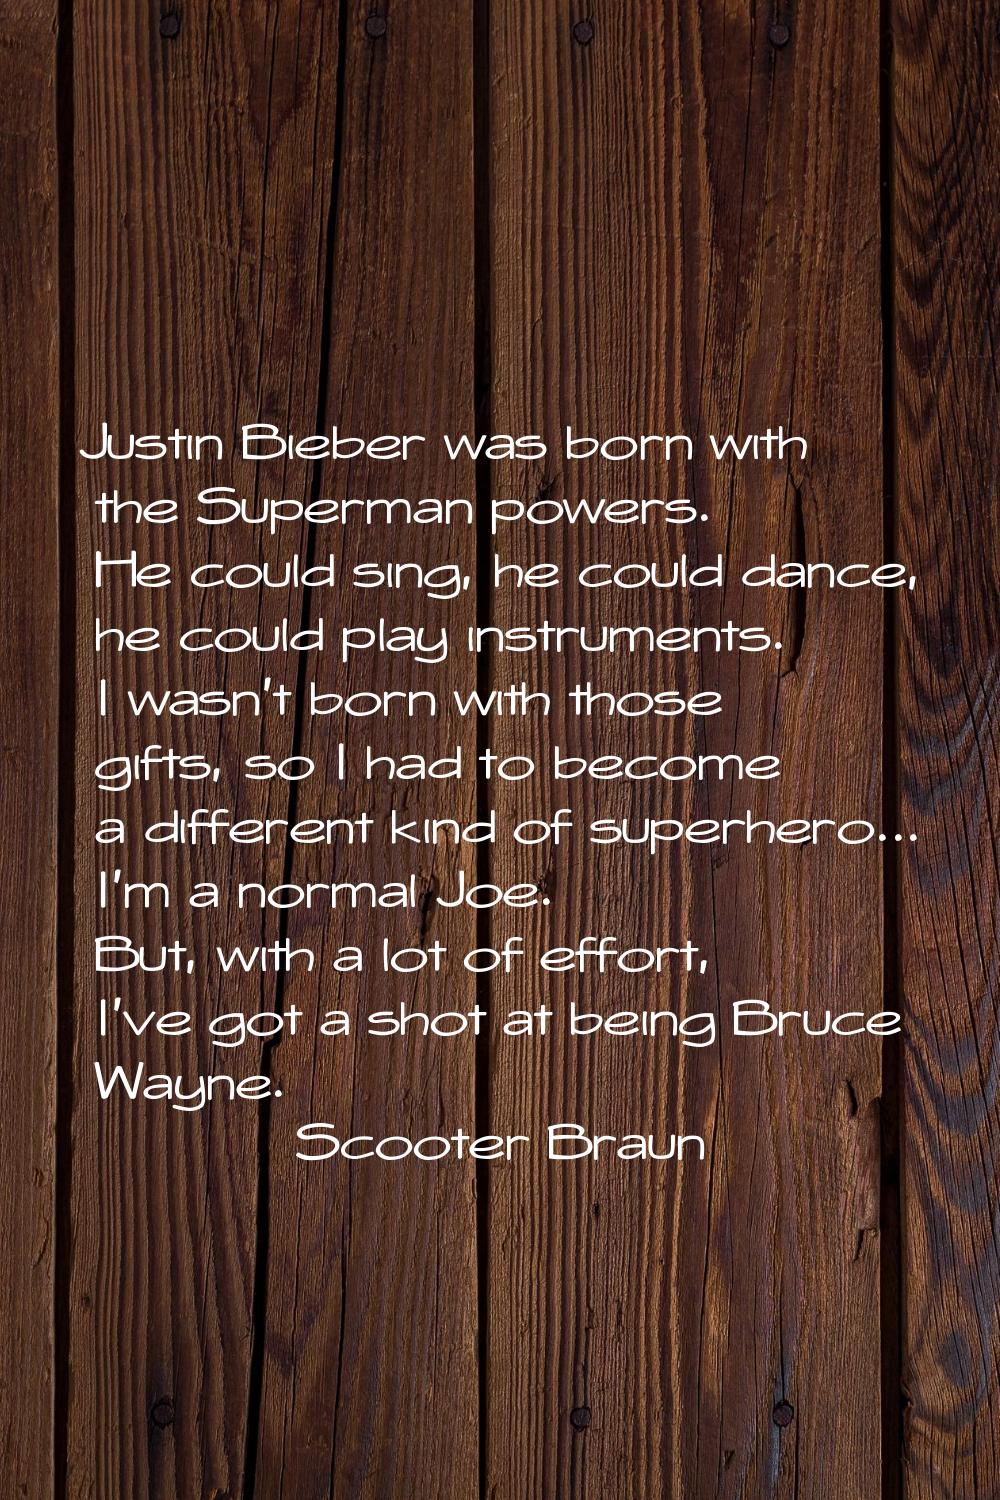 Justin Bieber was born with the Superman powers. He could sing, he could dance, he could play instr